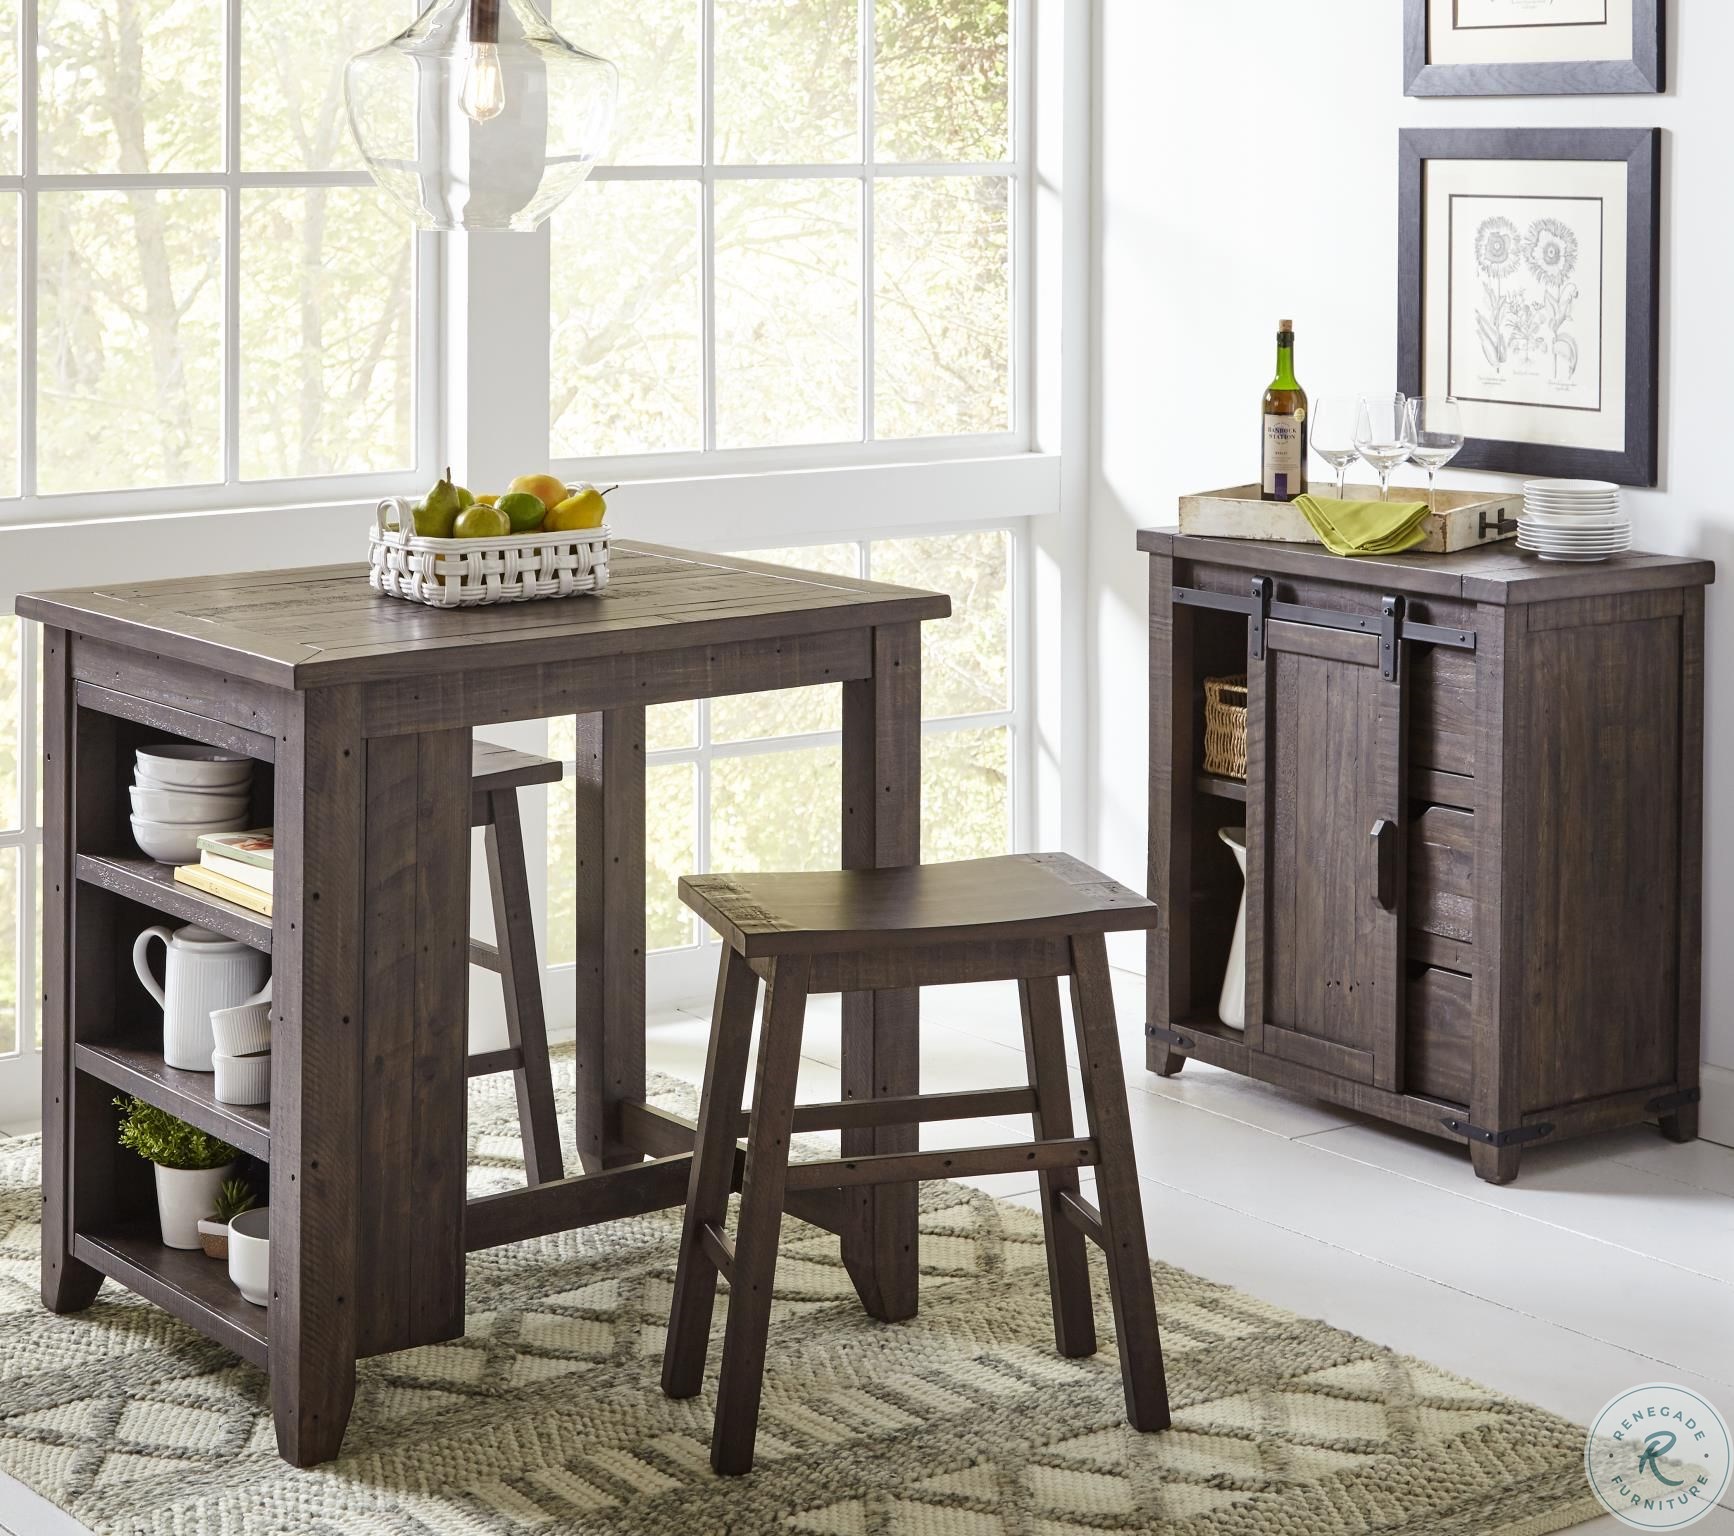 Madison County Barnwood Piece Counter Height Dining Set1